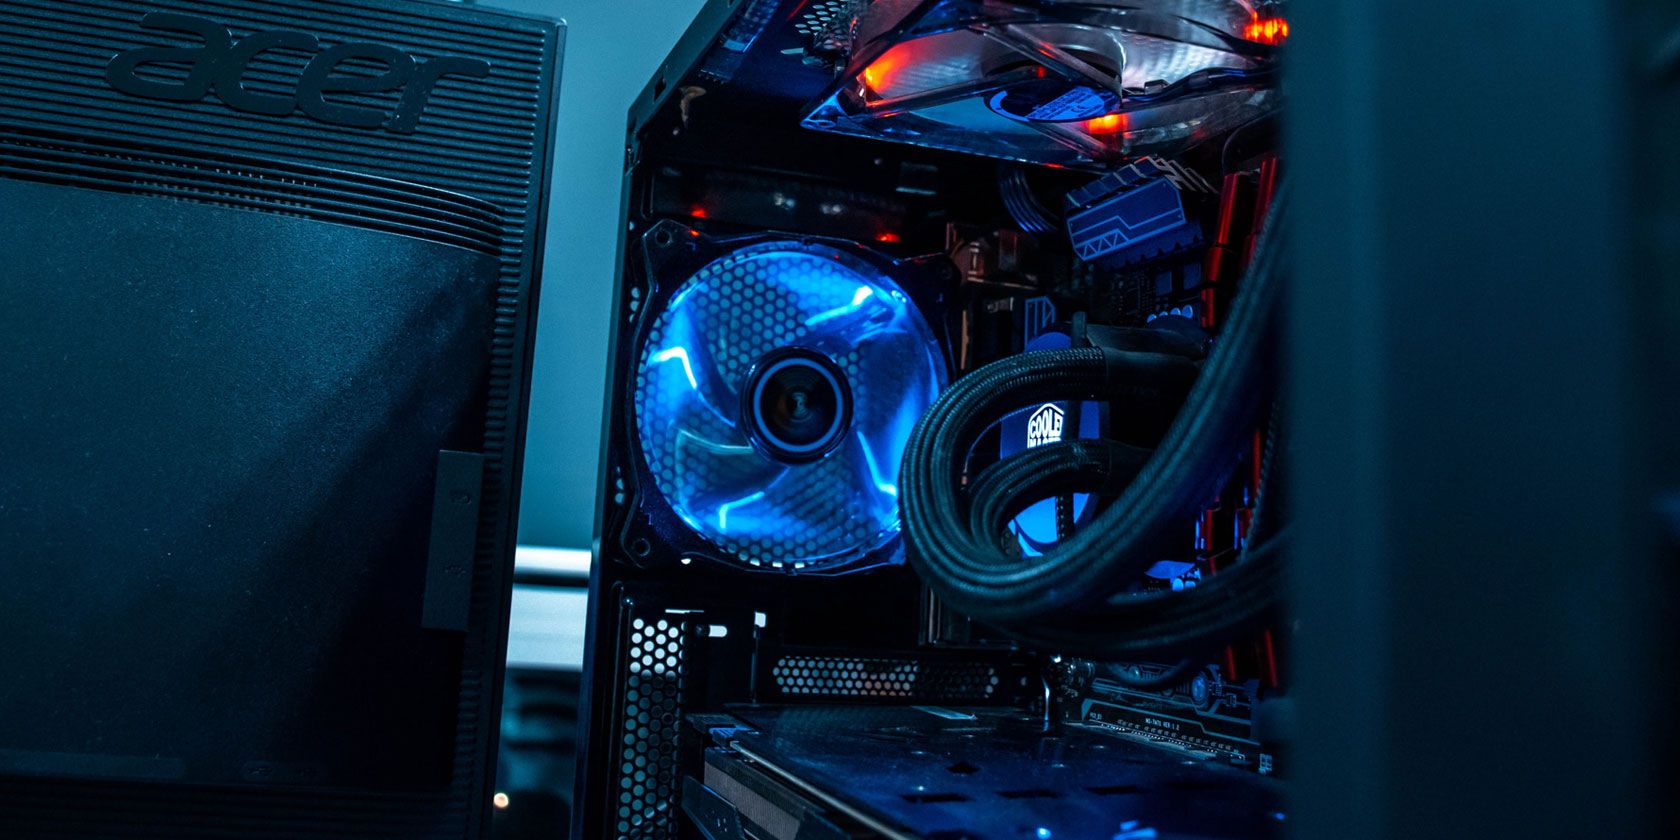 Hæl Moralsk Velkommen Getting Your First Gaming PC? Follow These 6 Tips